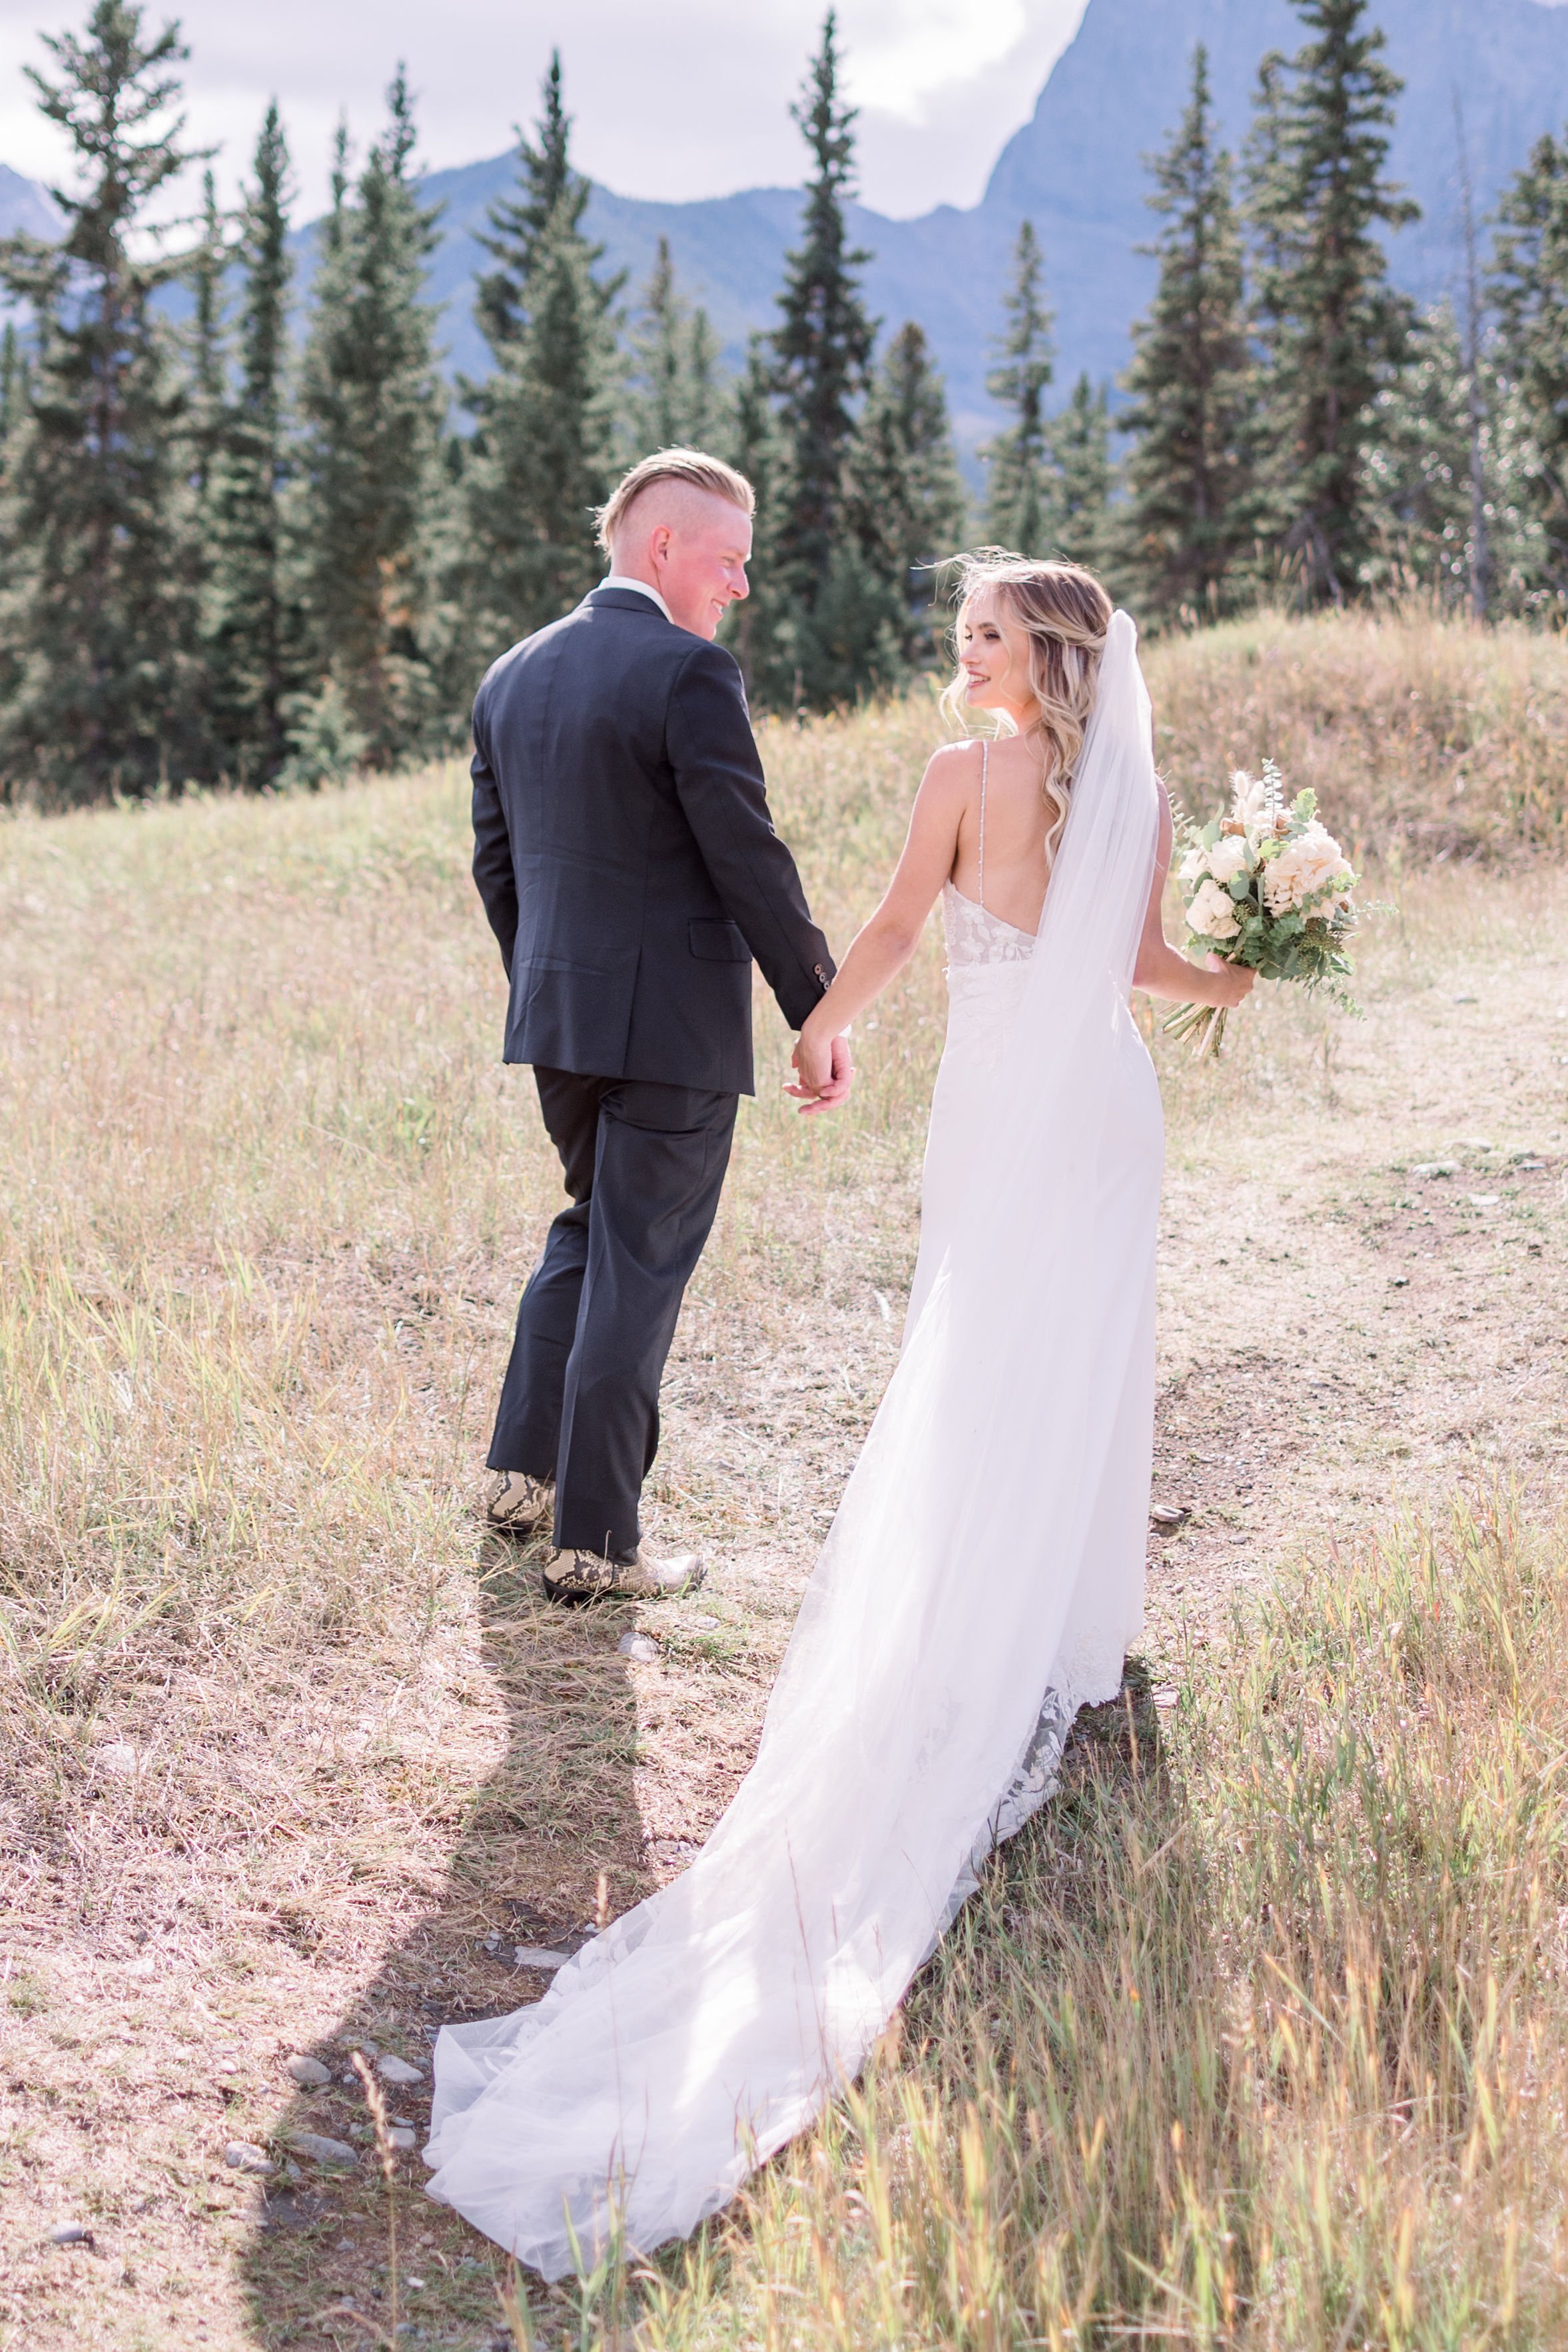  A bride and groom walk up a mountain pathway of yellow grass by Chelsea Mason Photography. mountain bridals Silvertip Golf #Albertaweddings #shesaidyes #Albertaweddingphotographers #SilvertipGolfCourse #ChelseaMasonPhotography #ChelseaMasonWeddings 